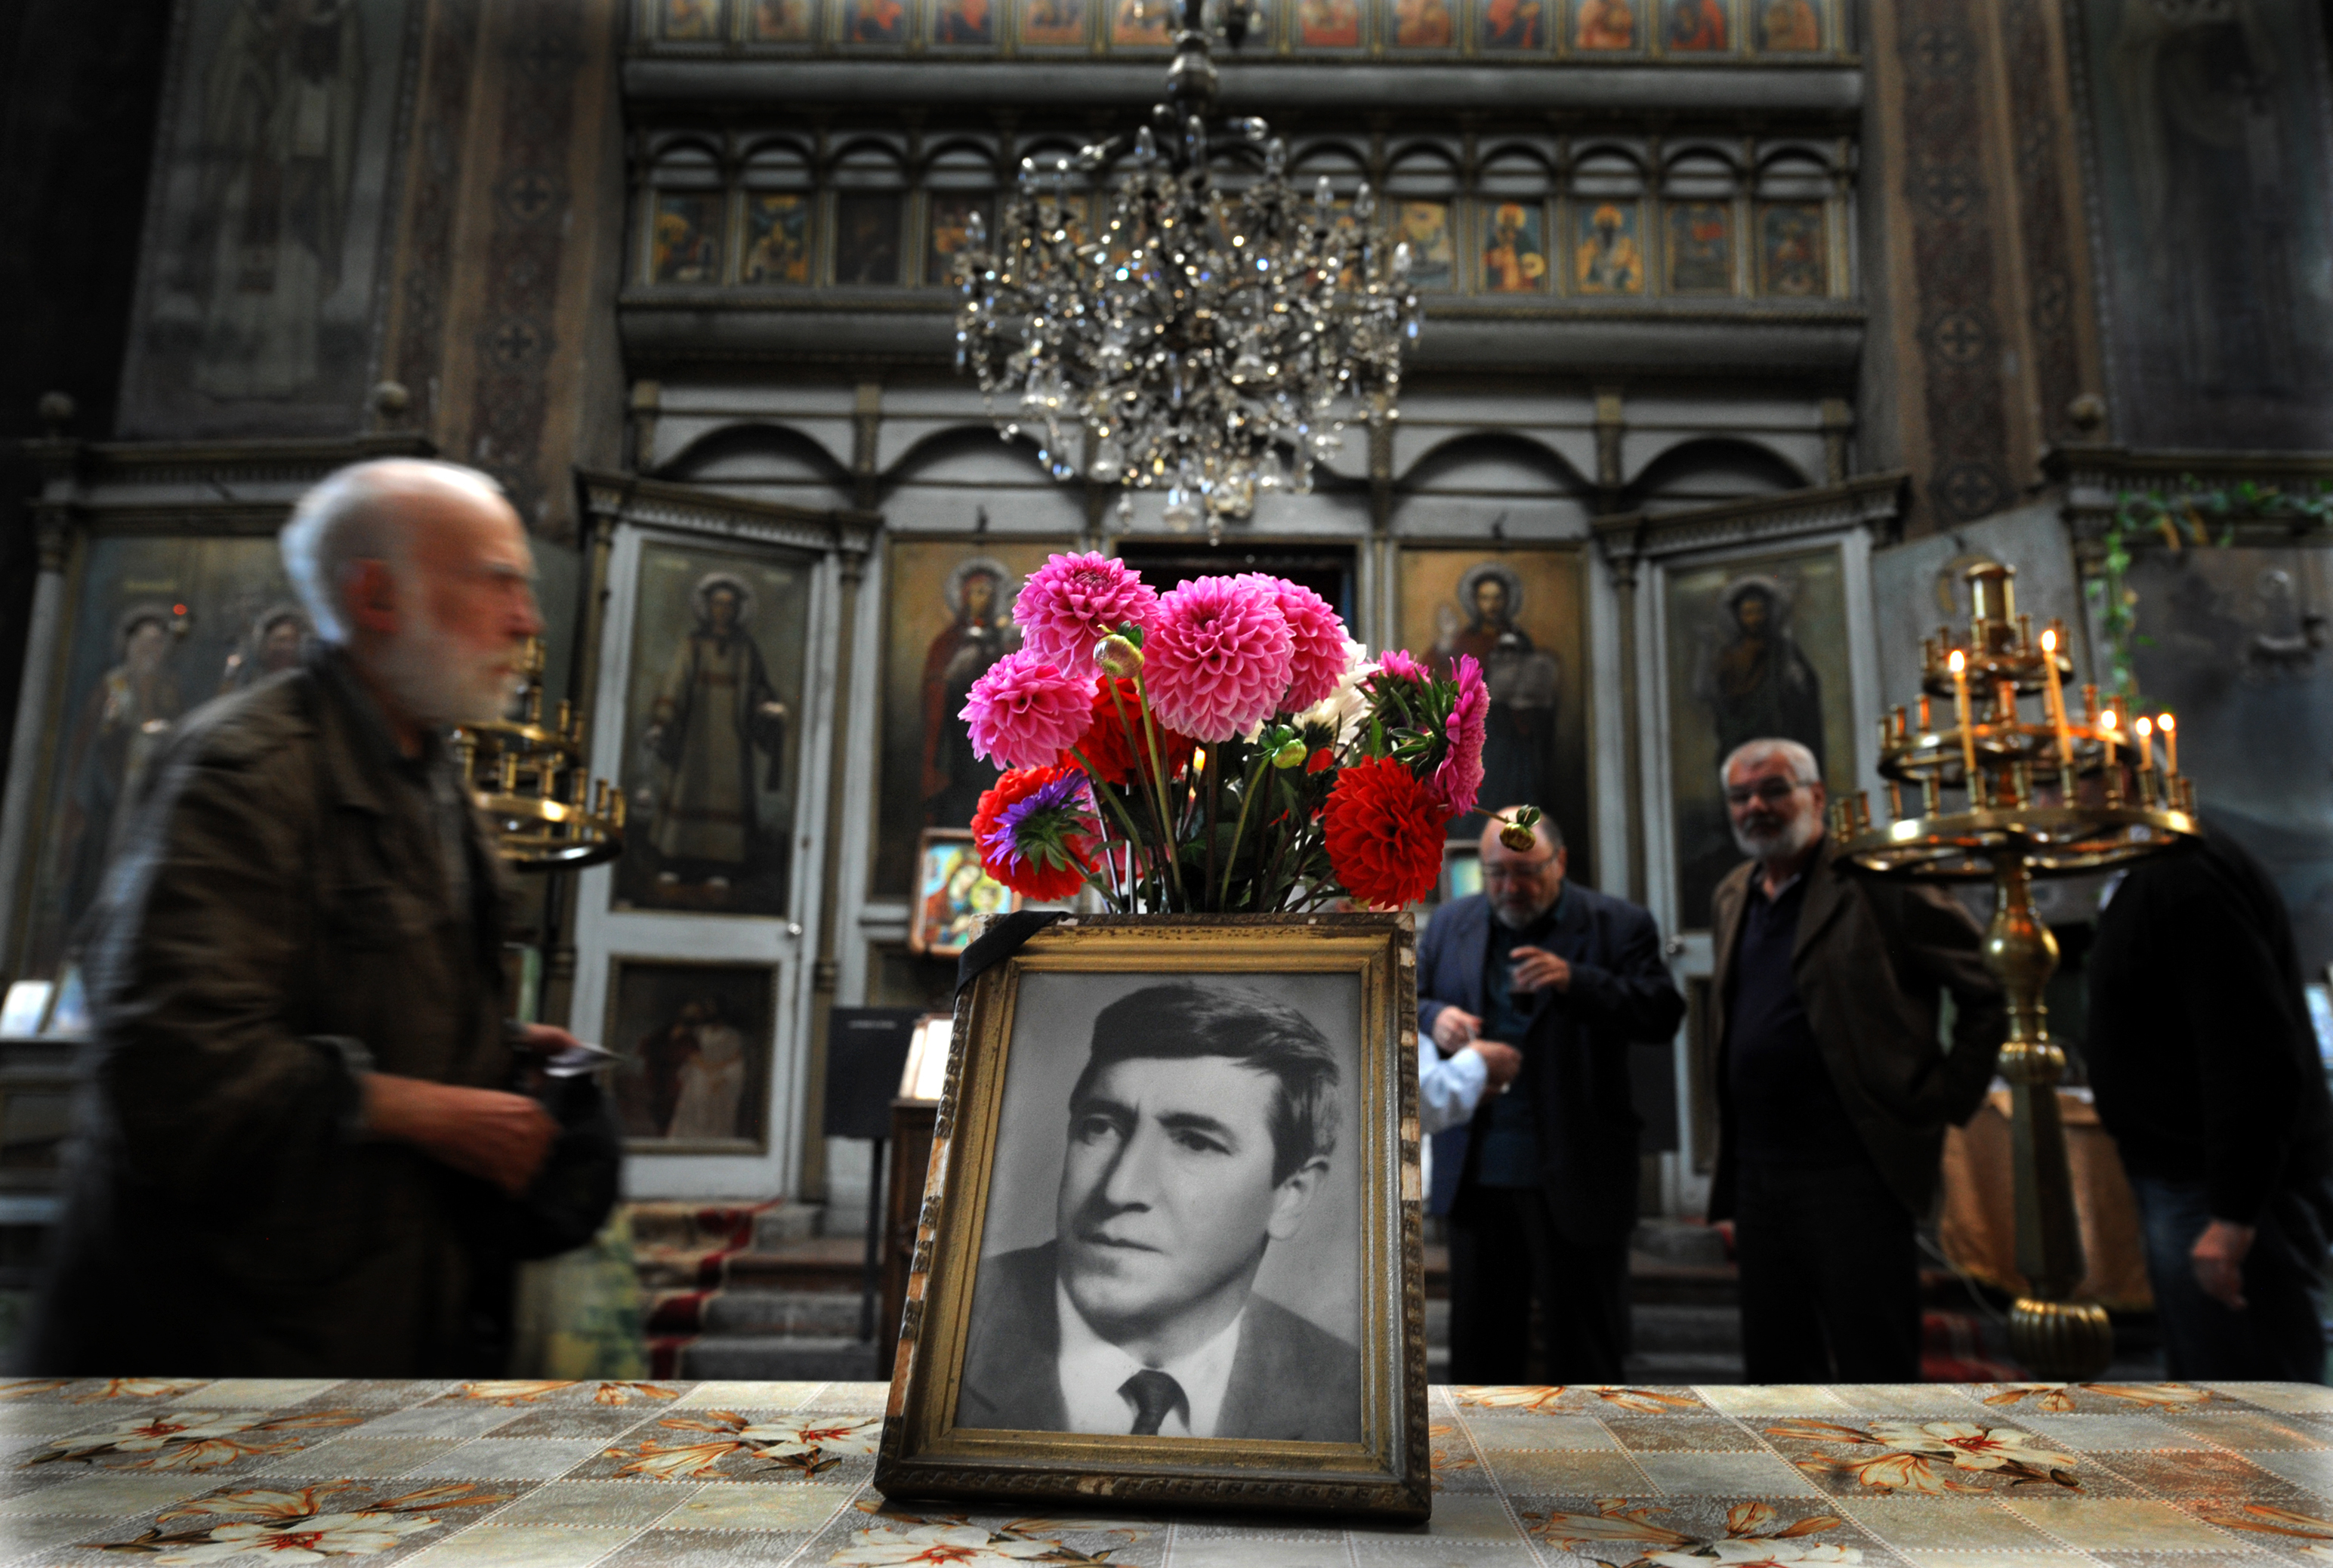 People attend a commemoration service marking 35 years of the dead of Georgi Markov, a bulgarian disident killed in London in 1978, in a church in Sofia on September 11, 2013. Bulgaria is set to close a 35-year probe into the spectacular "umbrella killing" of dissident Georgy Markov in London in 1978, the prosecution in Sofia said Monday. Markov's murder has gone down as one of the most daring and extraordinary crimes of the Cold War. The prominent journalist and playwright fled communist Bulgaria in 1969 for Britain but continued to lambast the regime in reports for the BBC and Radio Free Europe. (AFP—AFP/Nikolay Doychinov/Getty Images)